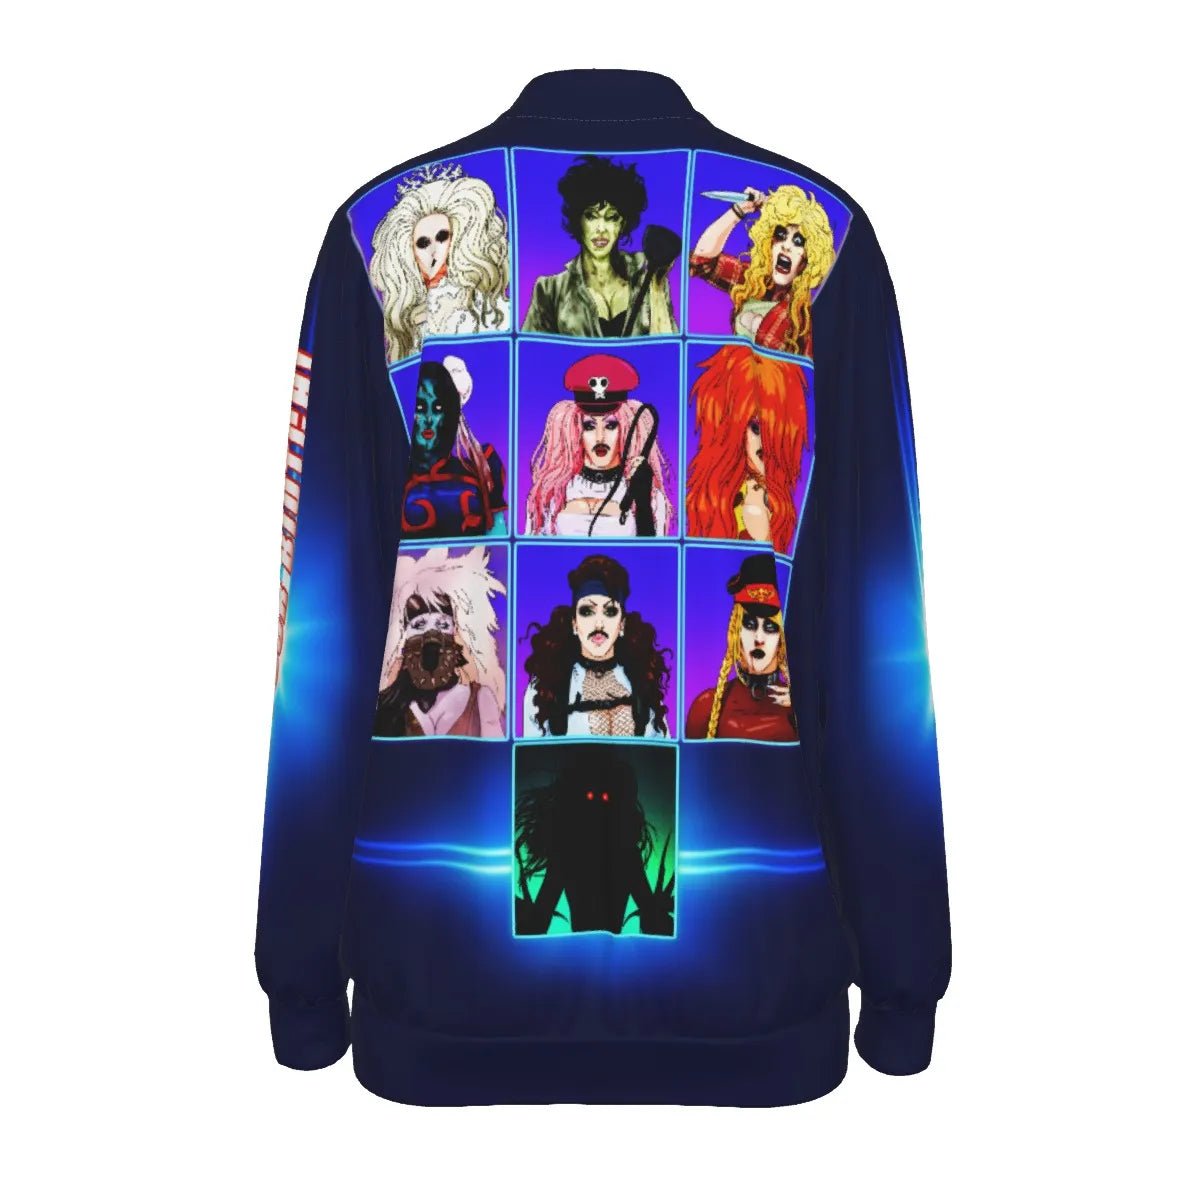 Biqtch Puddin - Choose Your Fighter - Baseball Jacket - dragqueenmerch